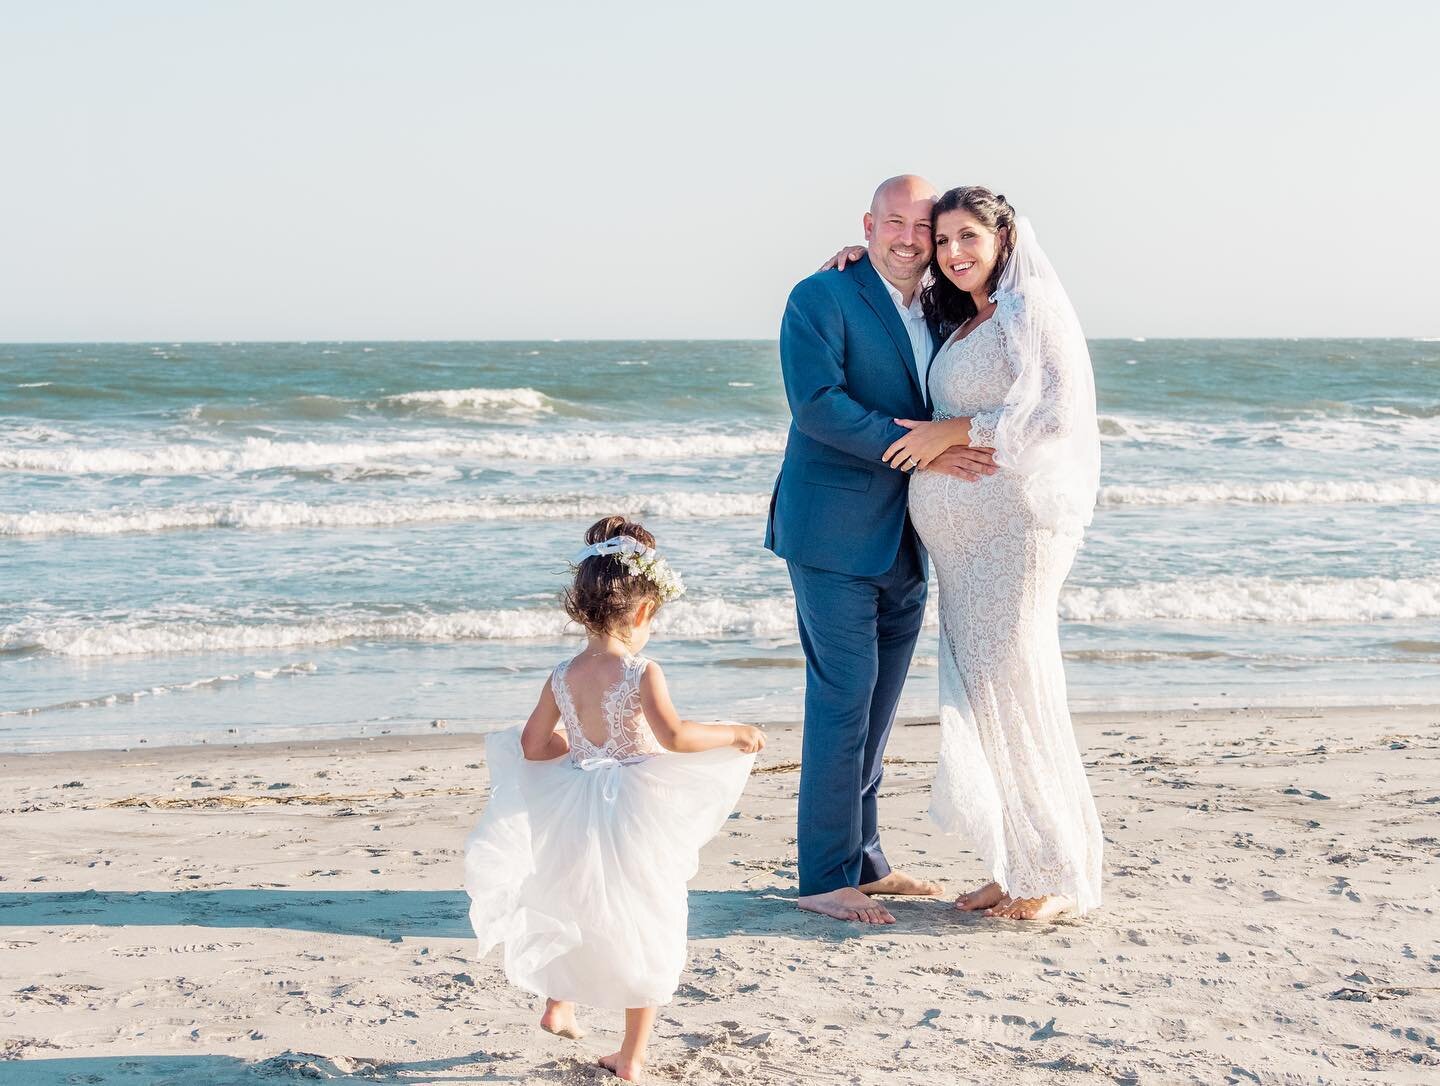 Beautiful elopement on the night of the lunar eclipse on Folly! Congratulations on your beautiful family and marriage, Nicole + Louis! 
.
.
Planning:  @bwedcharleston 
Photos: @livewilderstudio 
.
.
#livewilder #livewilderstudio #ilovefollybeach #fol